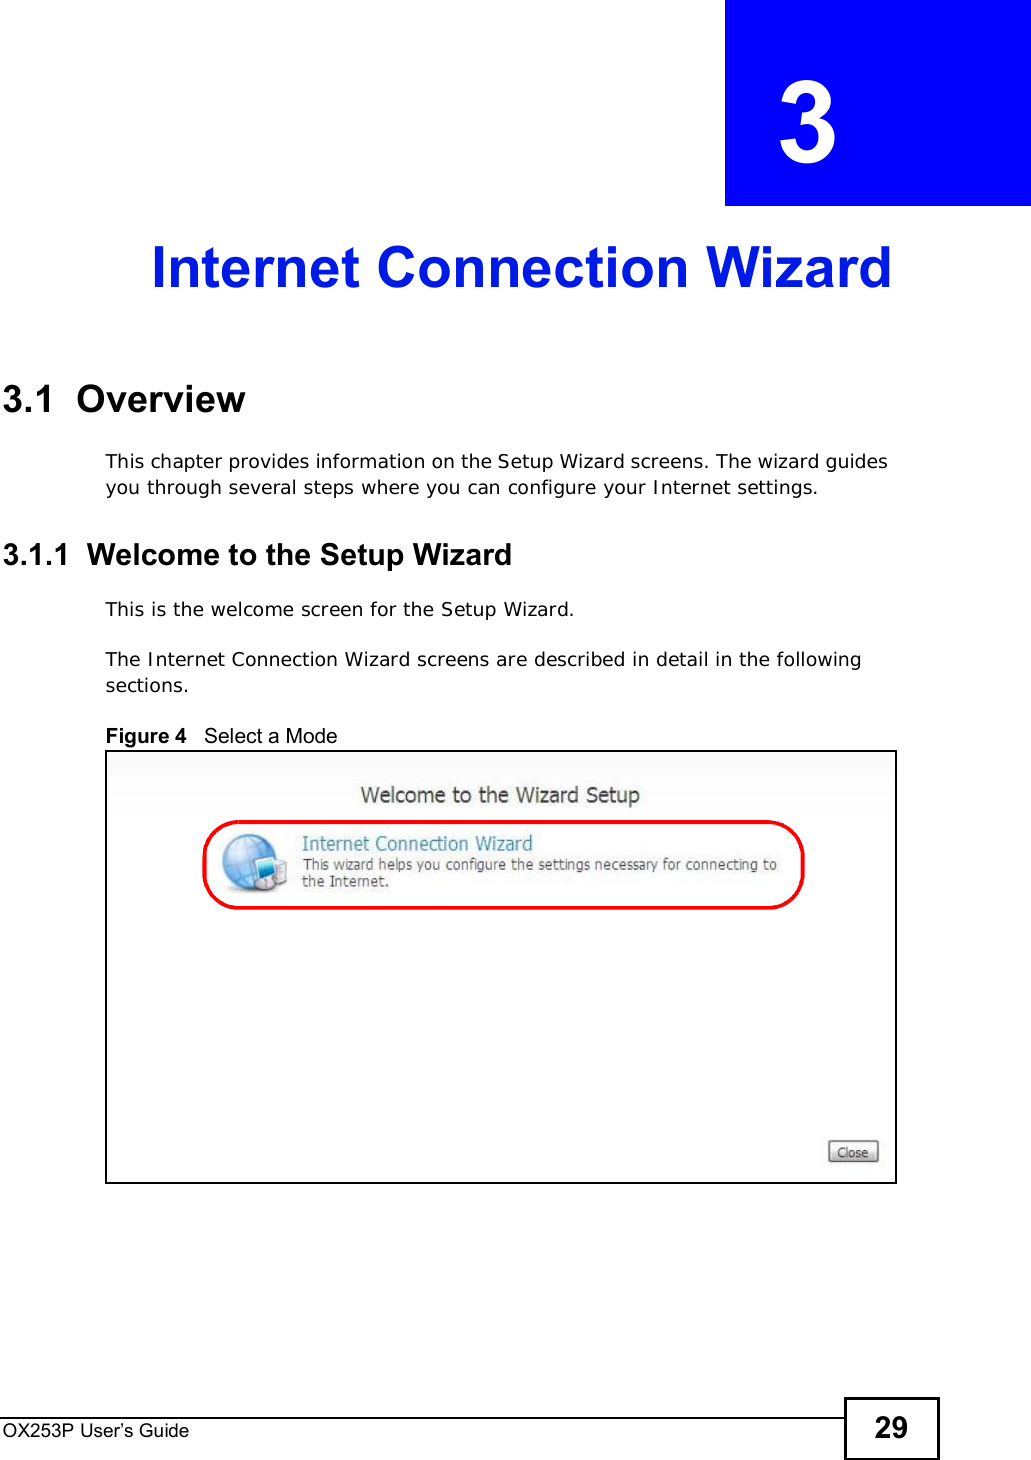 OX253P User’s Guide 29CHAPTER  3 Internet Connection Wizard3.1  OverviewThis chapter provides information on the Setup Wizard screens. The wizard guides you through several steps where you can configure your Internet settings.3.1.1  Welcome to the Setup WizardThis is the welcome screen for the Setup Wizard.The Internet Connection Wizard screens are described in detail in the following sections.Figure 4   Select a Mode